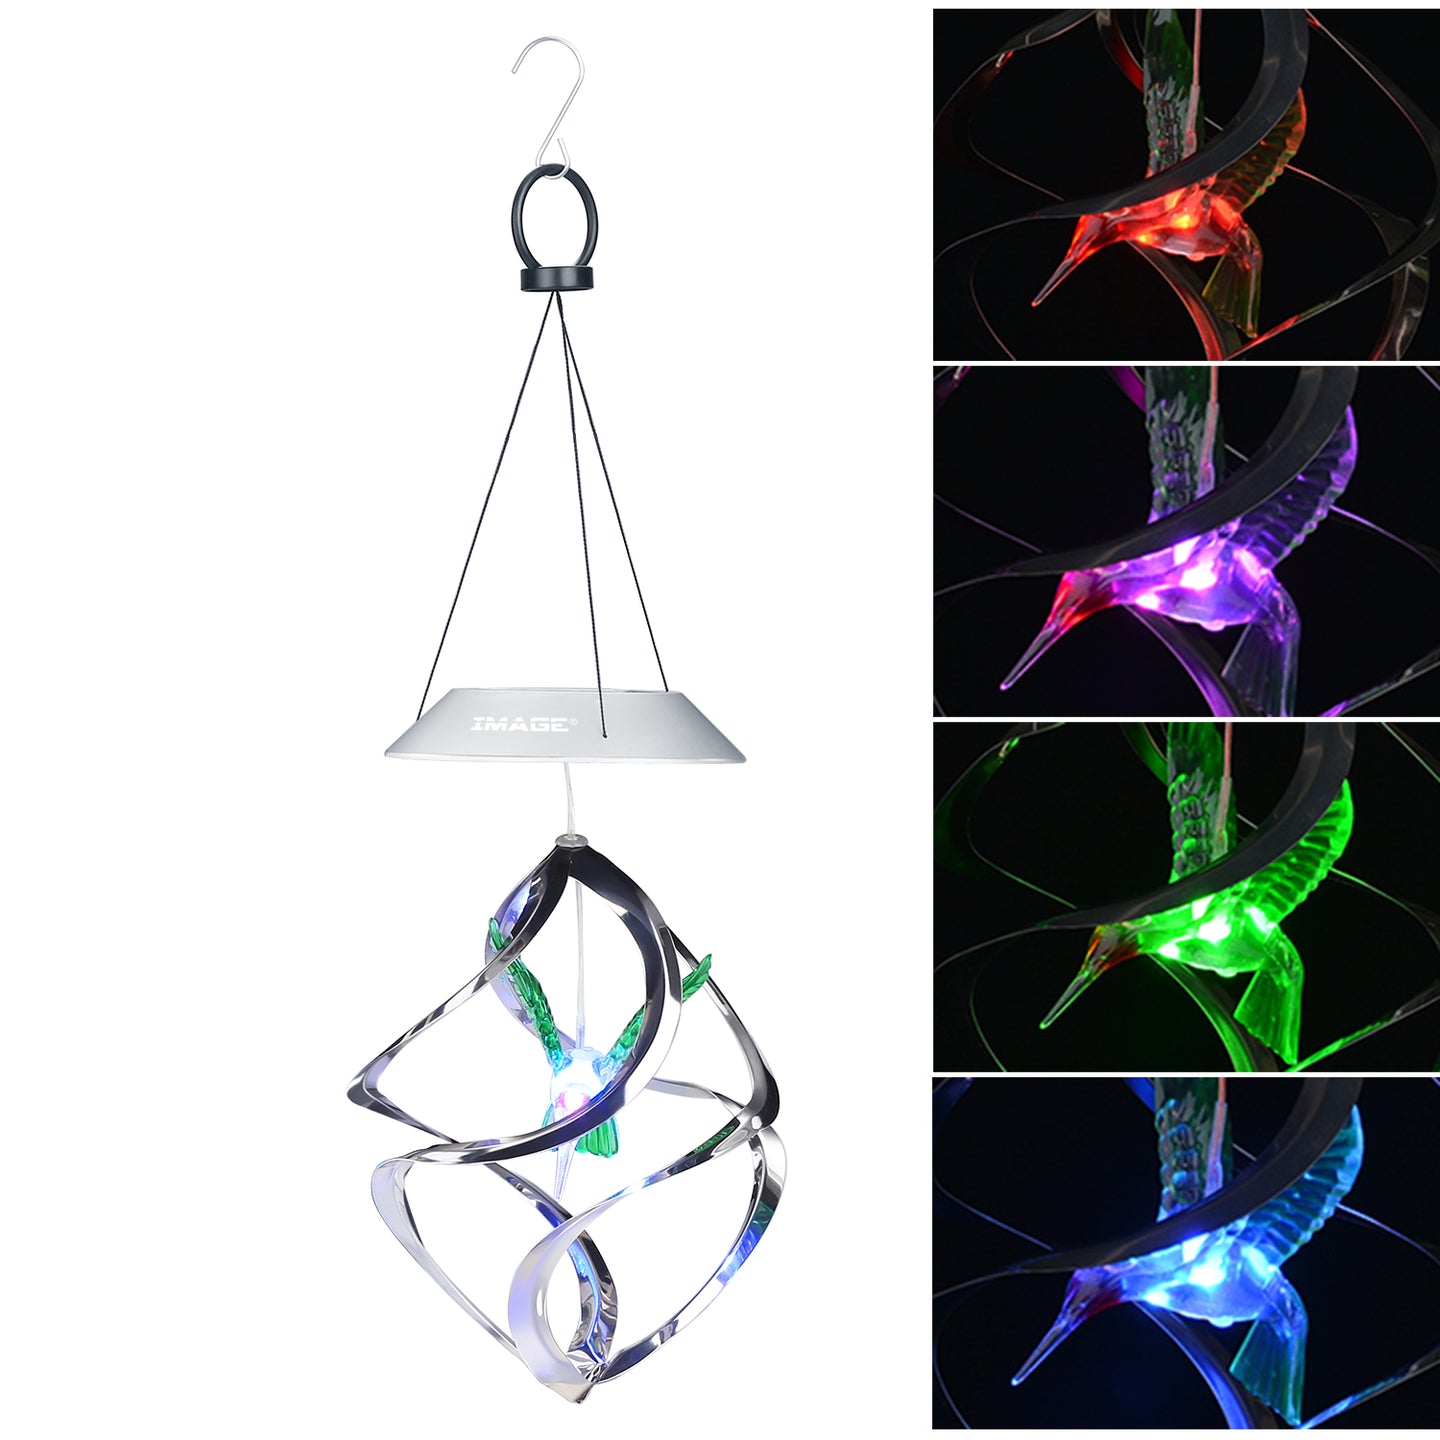 Hummingbird Wind Chime - Color Changing Solar Hanging Lights Xmas Gifts for Decor Home Garden Patio Yard Indoor Outdoor